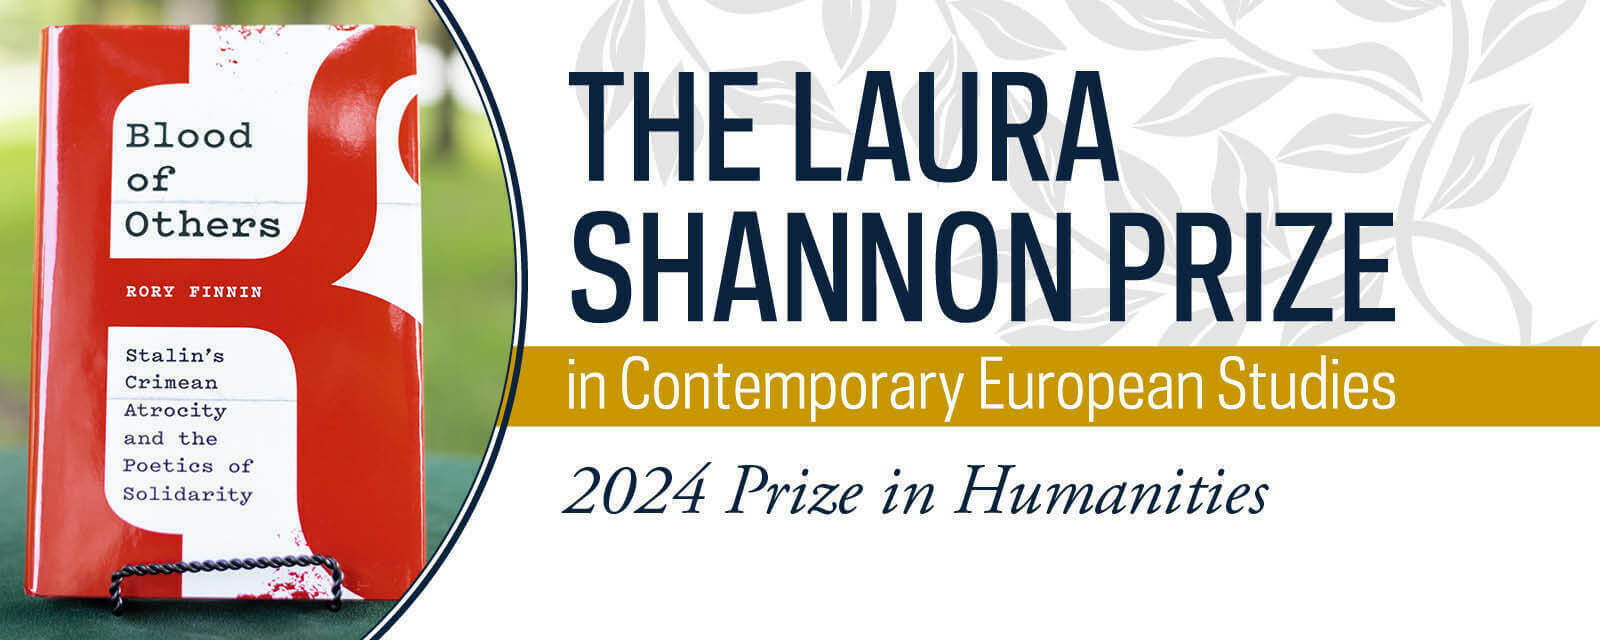 2024 Laura Shannon Prize goes to Blood of Others by Rory Finnin